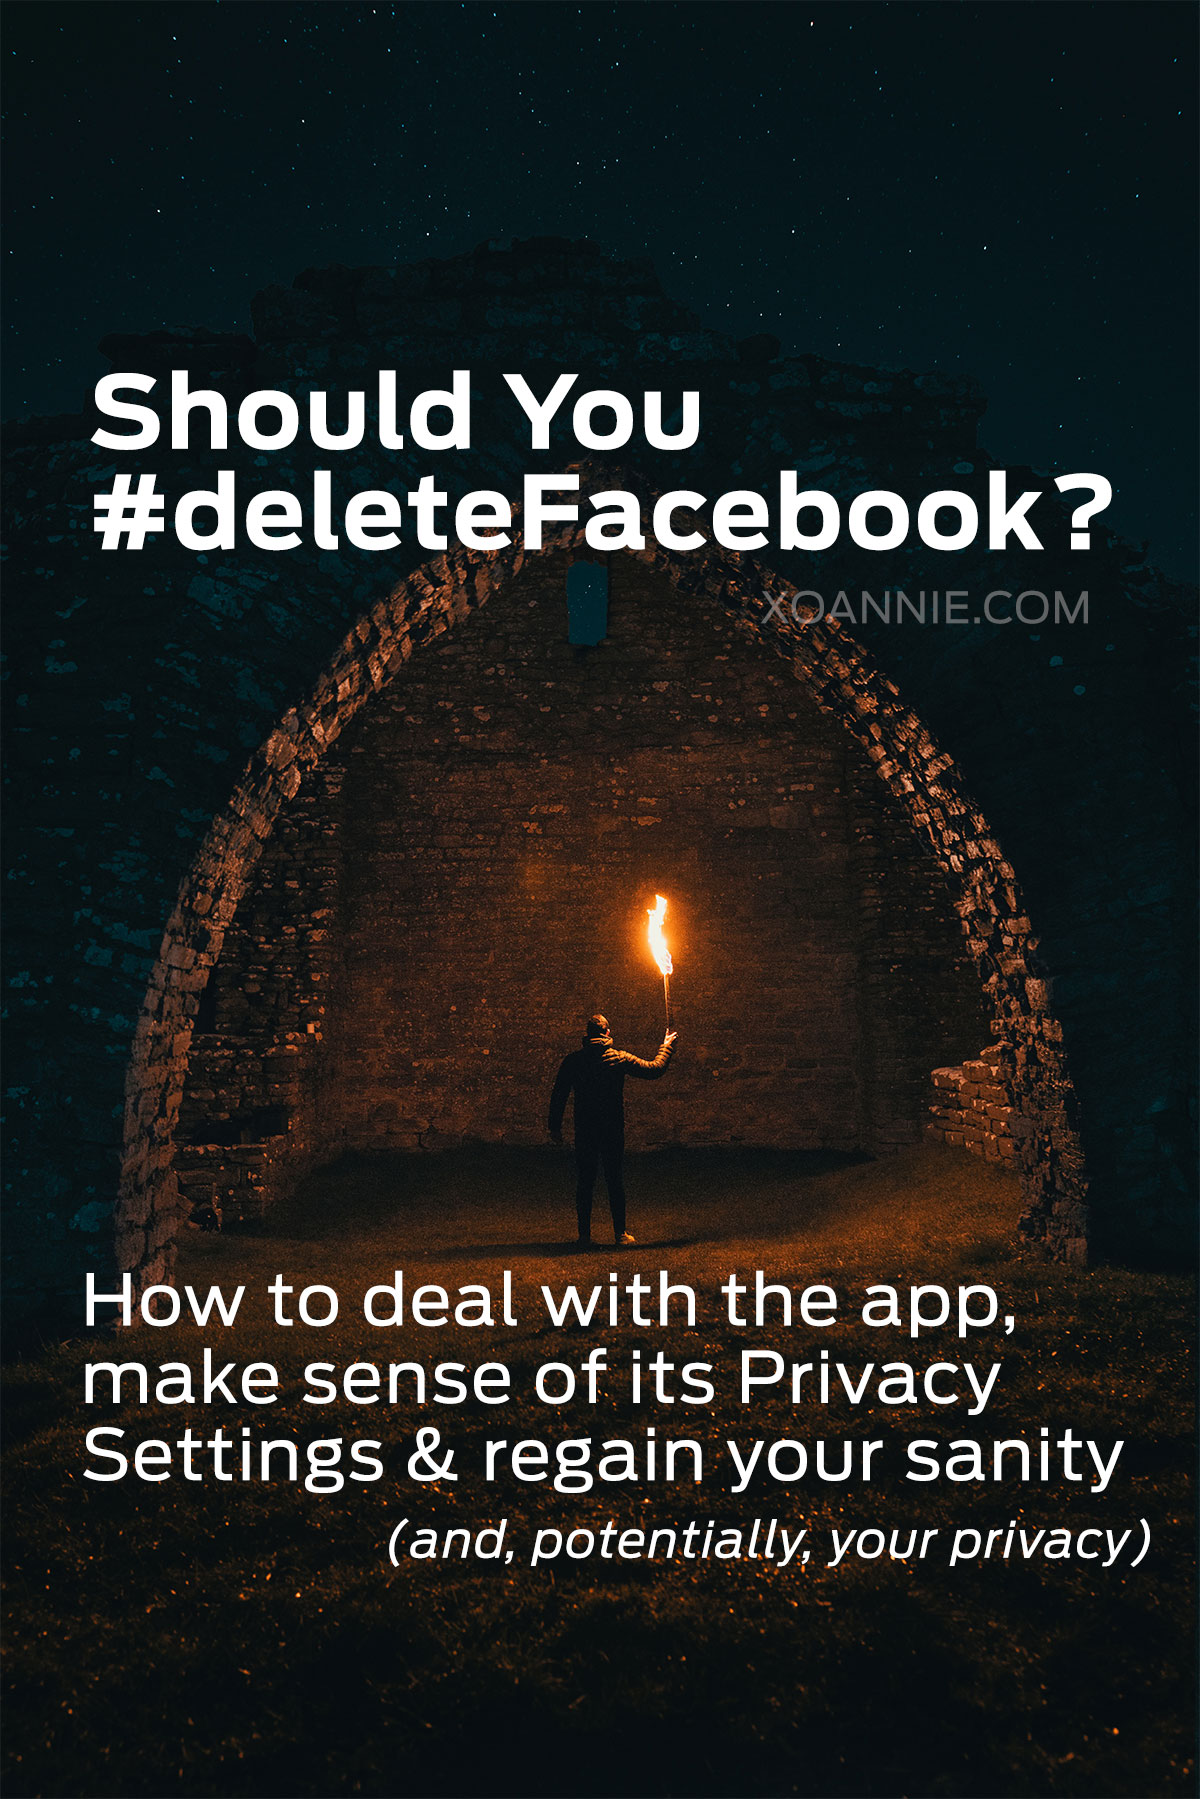 #deleteFacebook Isn’t The Answer: We Can Do MORE